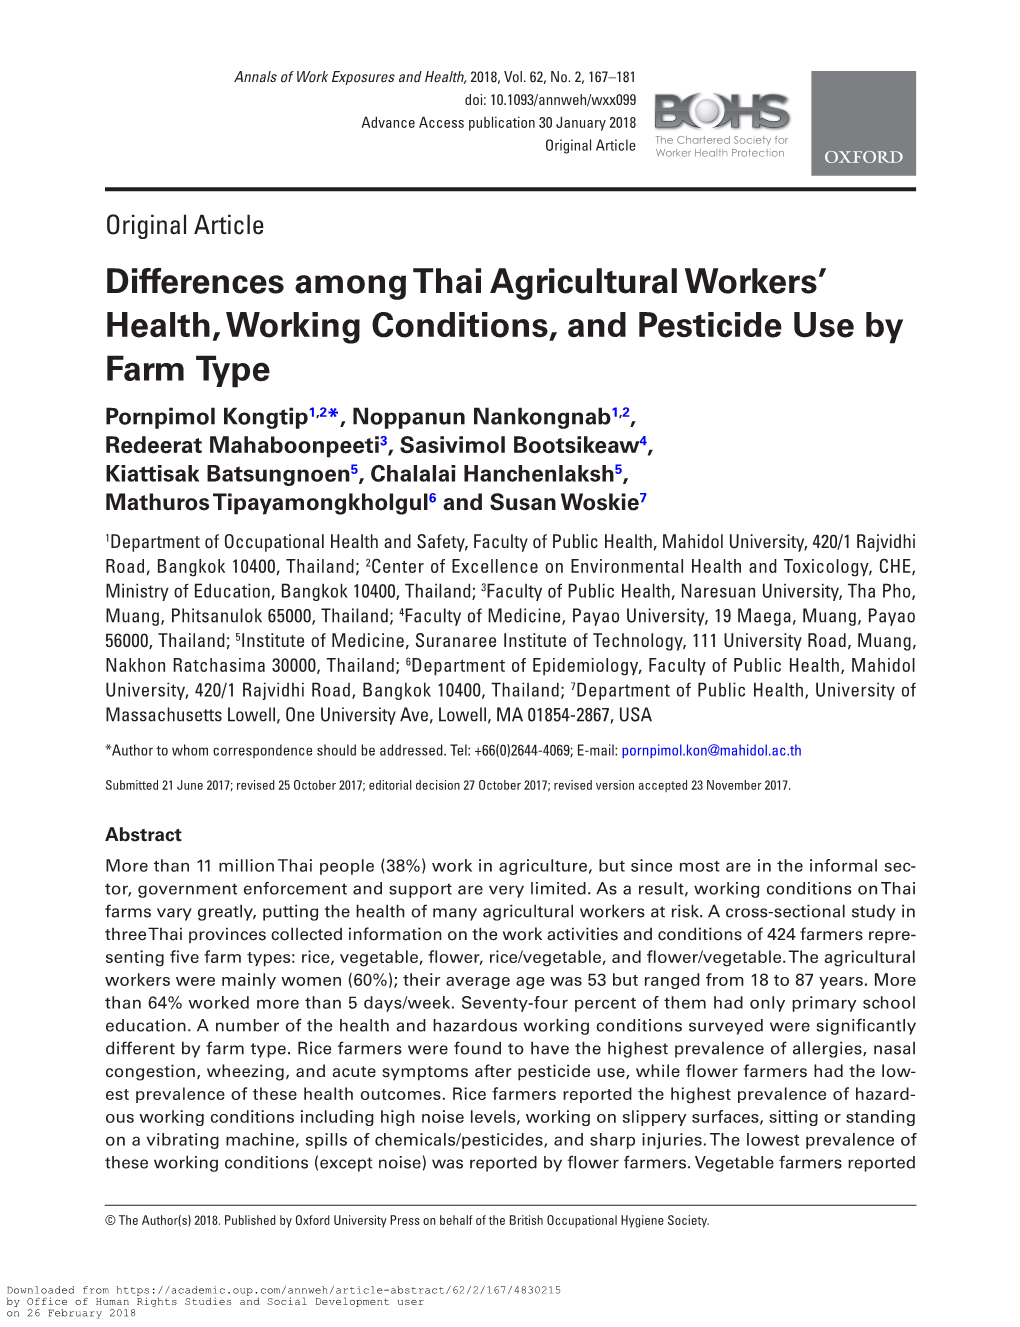 Differences Among Thai Agricultural Workers' Health, Working Conditions, and Pesticide Use by Farm Type